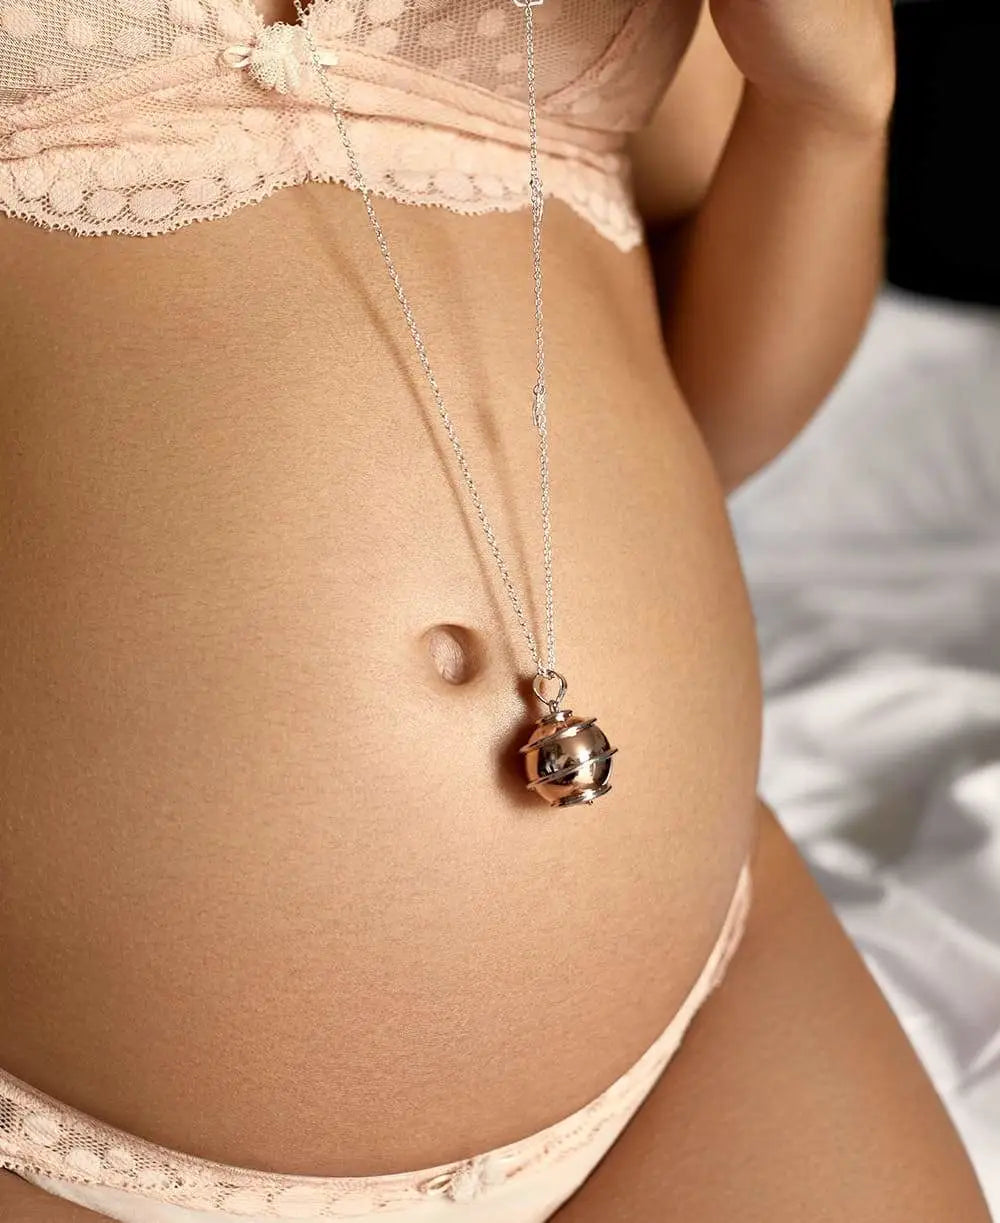 Bola de grossesse Twist Rhodium Or Rose - Mom-to-be necklace